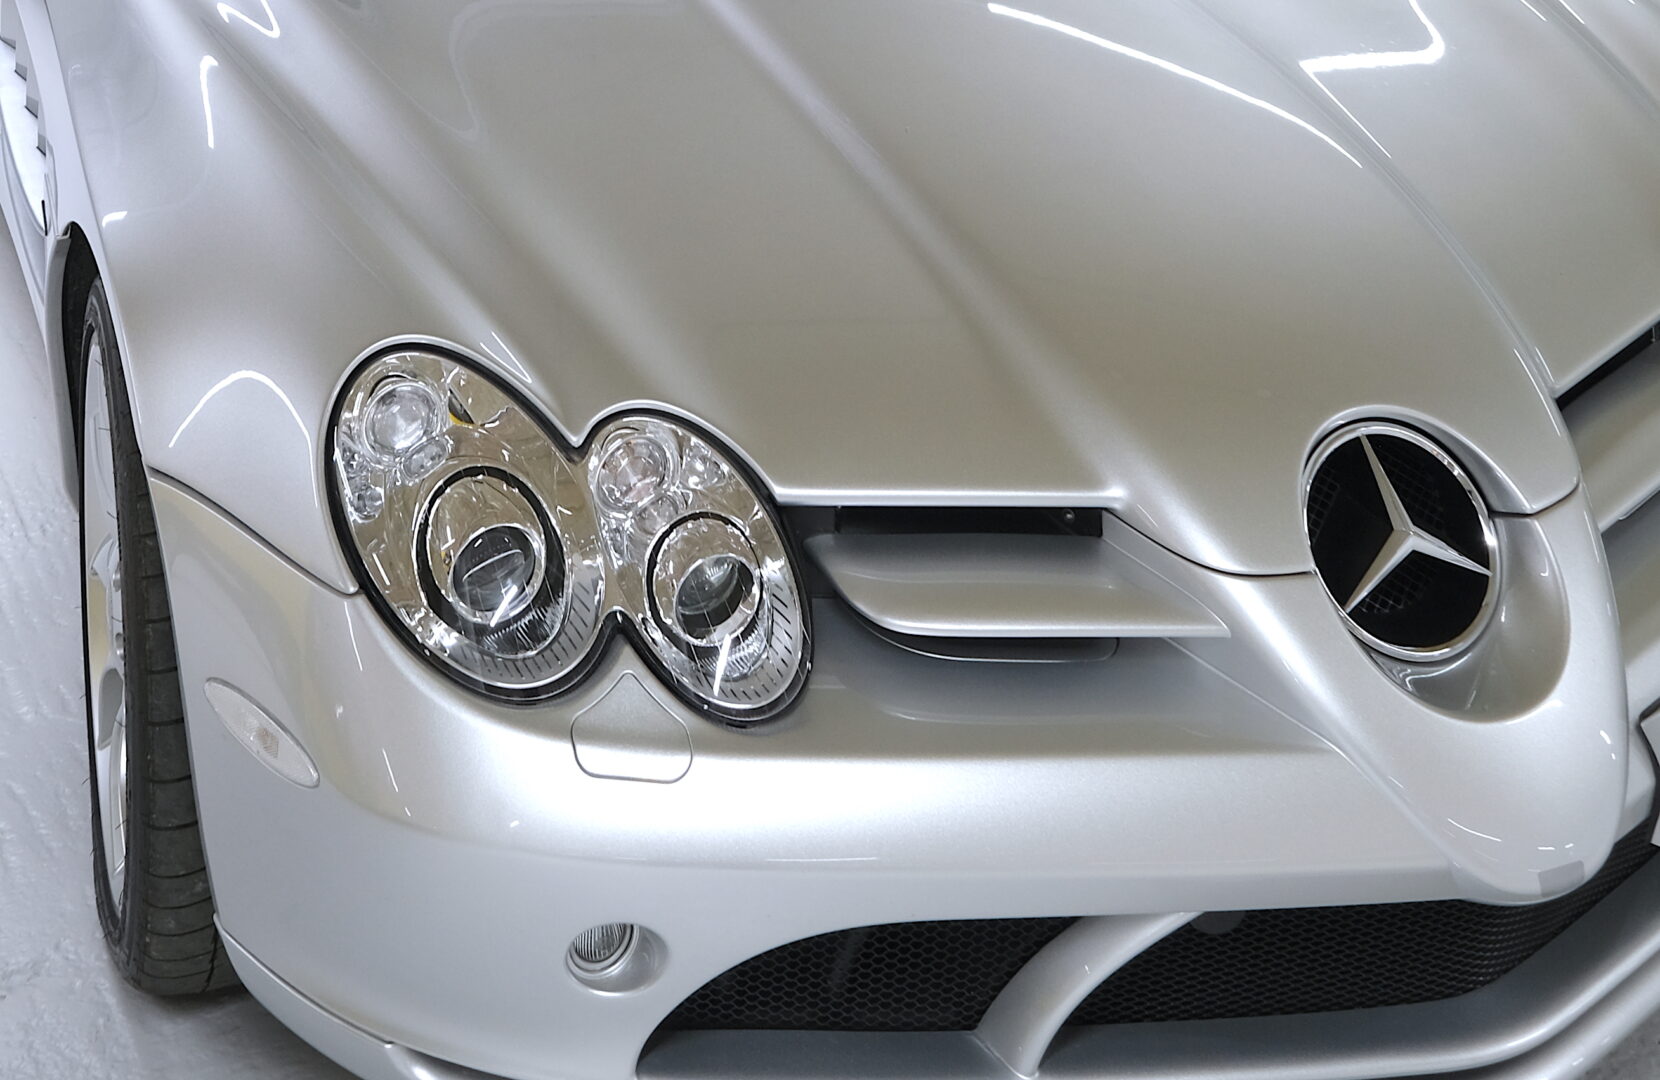 Protect creates the optimum conditions when storing your supercar.